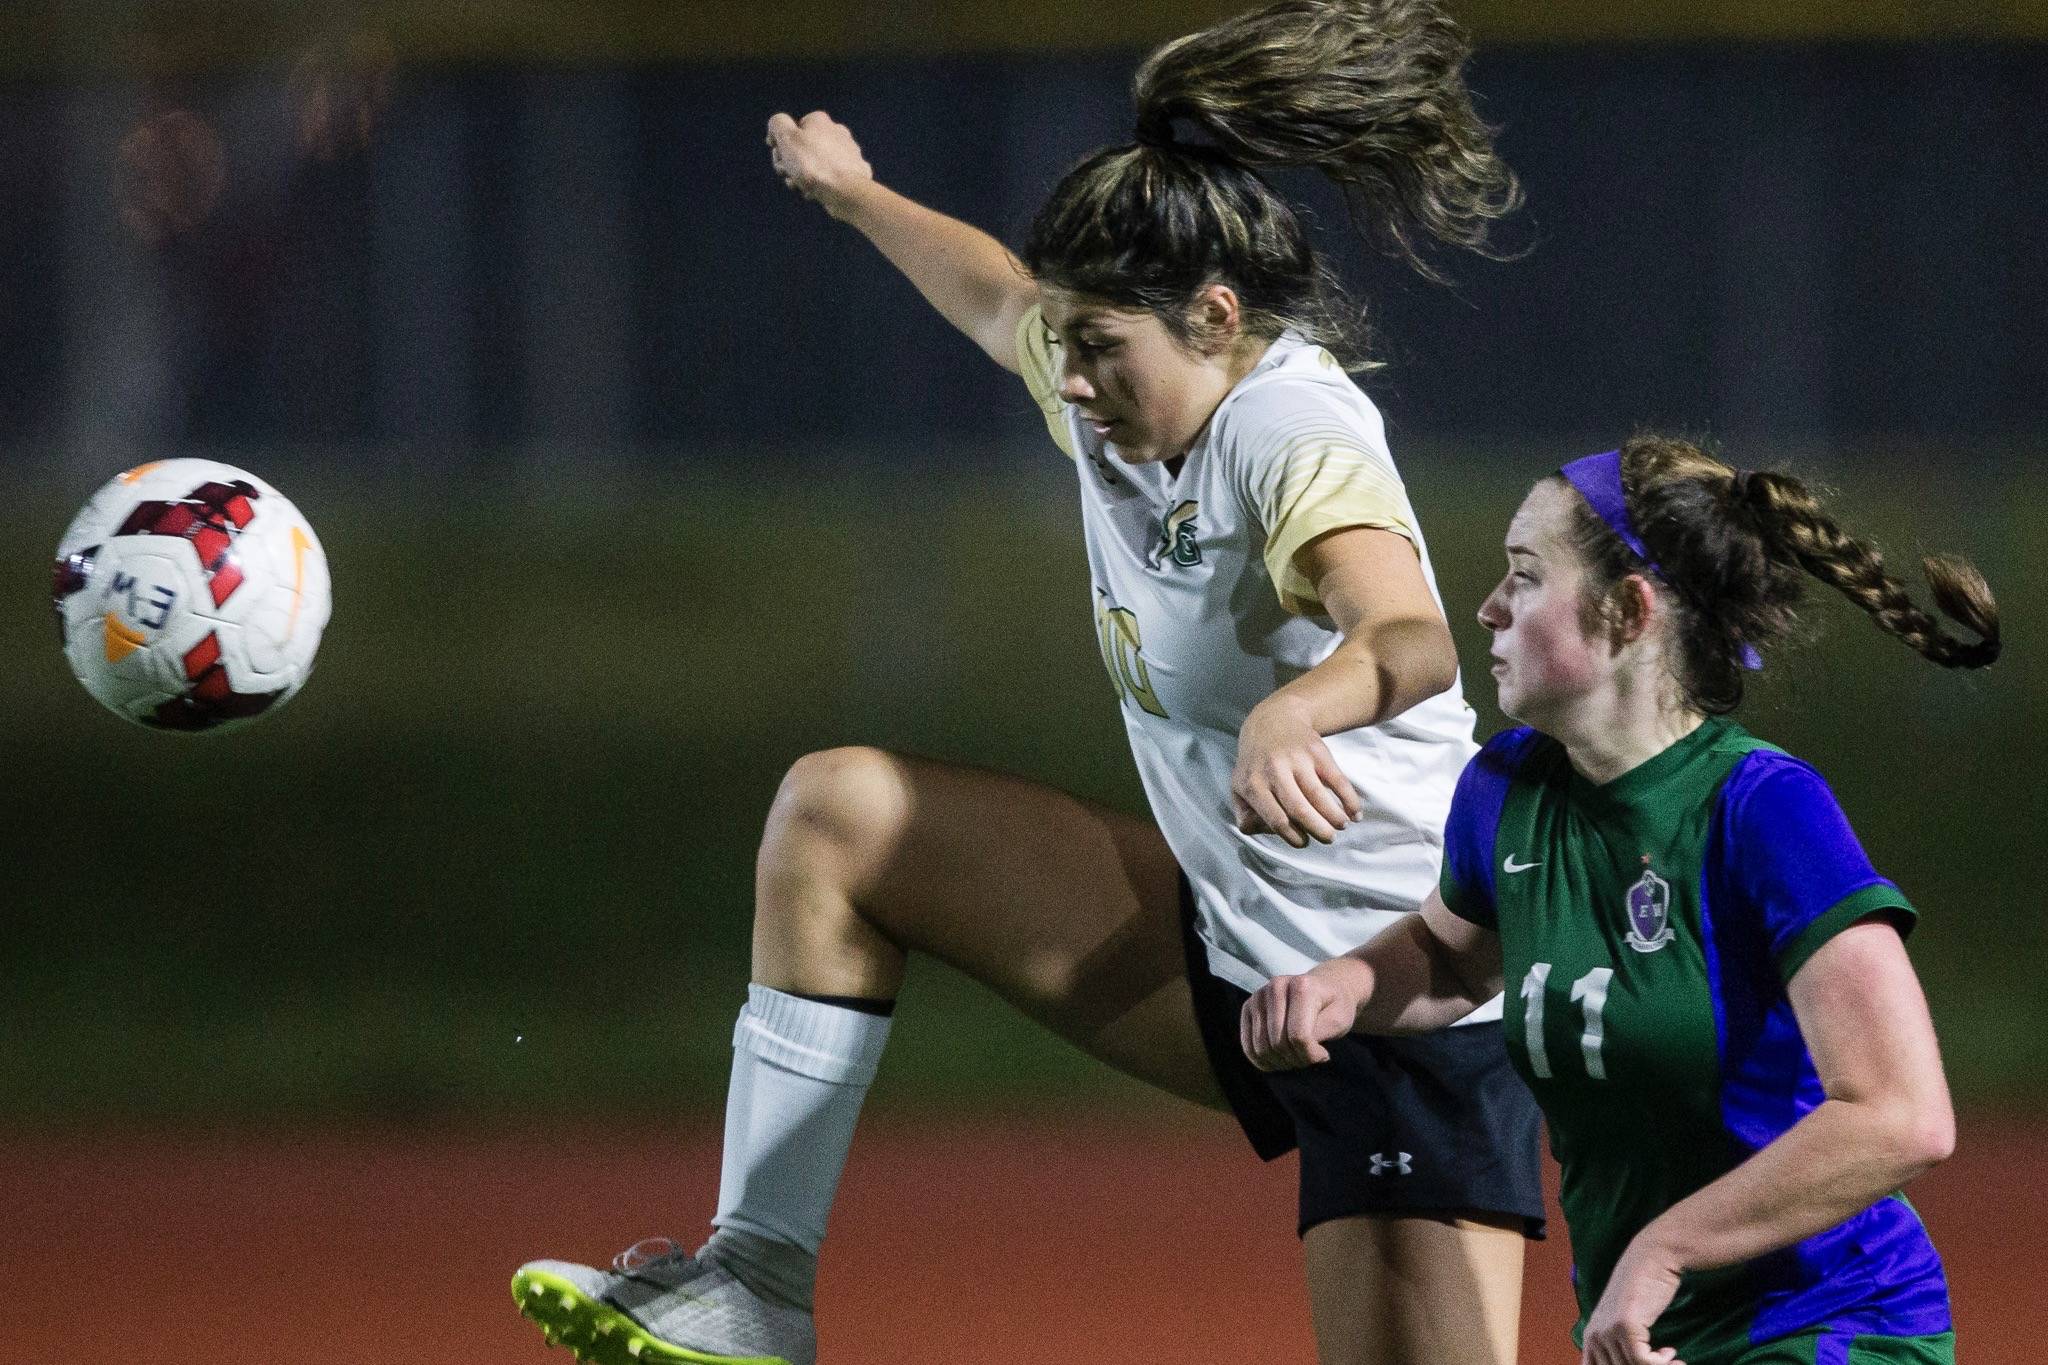 Marysville Getchell’s Alana Gomez (left) battles Edmonds-Woodway’s Sydney Chappell for the ball during the Chargers’ state-clinching win last week. Marysville Getchell is one of six local prep girls soccer teams headed to their respective state tournaments. (Olivia Vanni / The Herald)